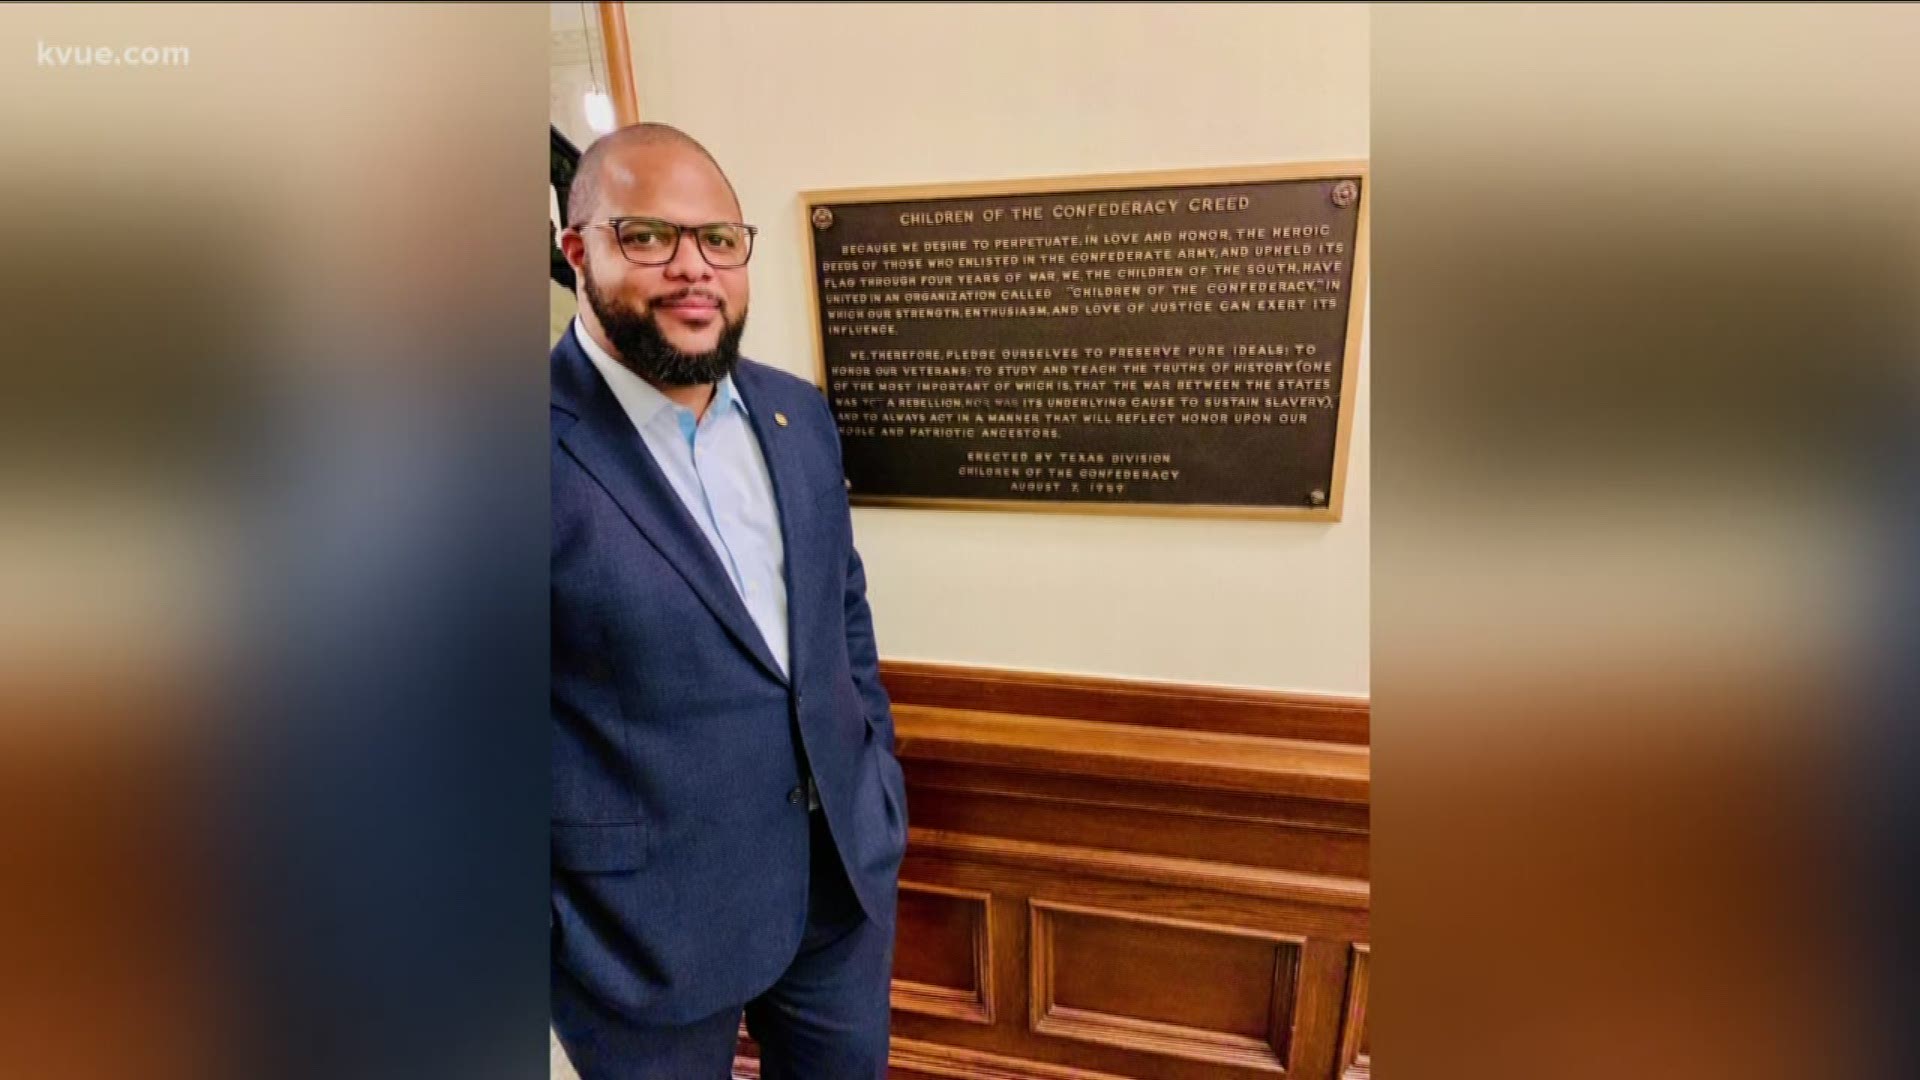 A Confederate plaque is gone from the Texas Capitol after months of dispute.